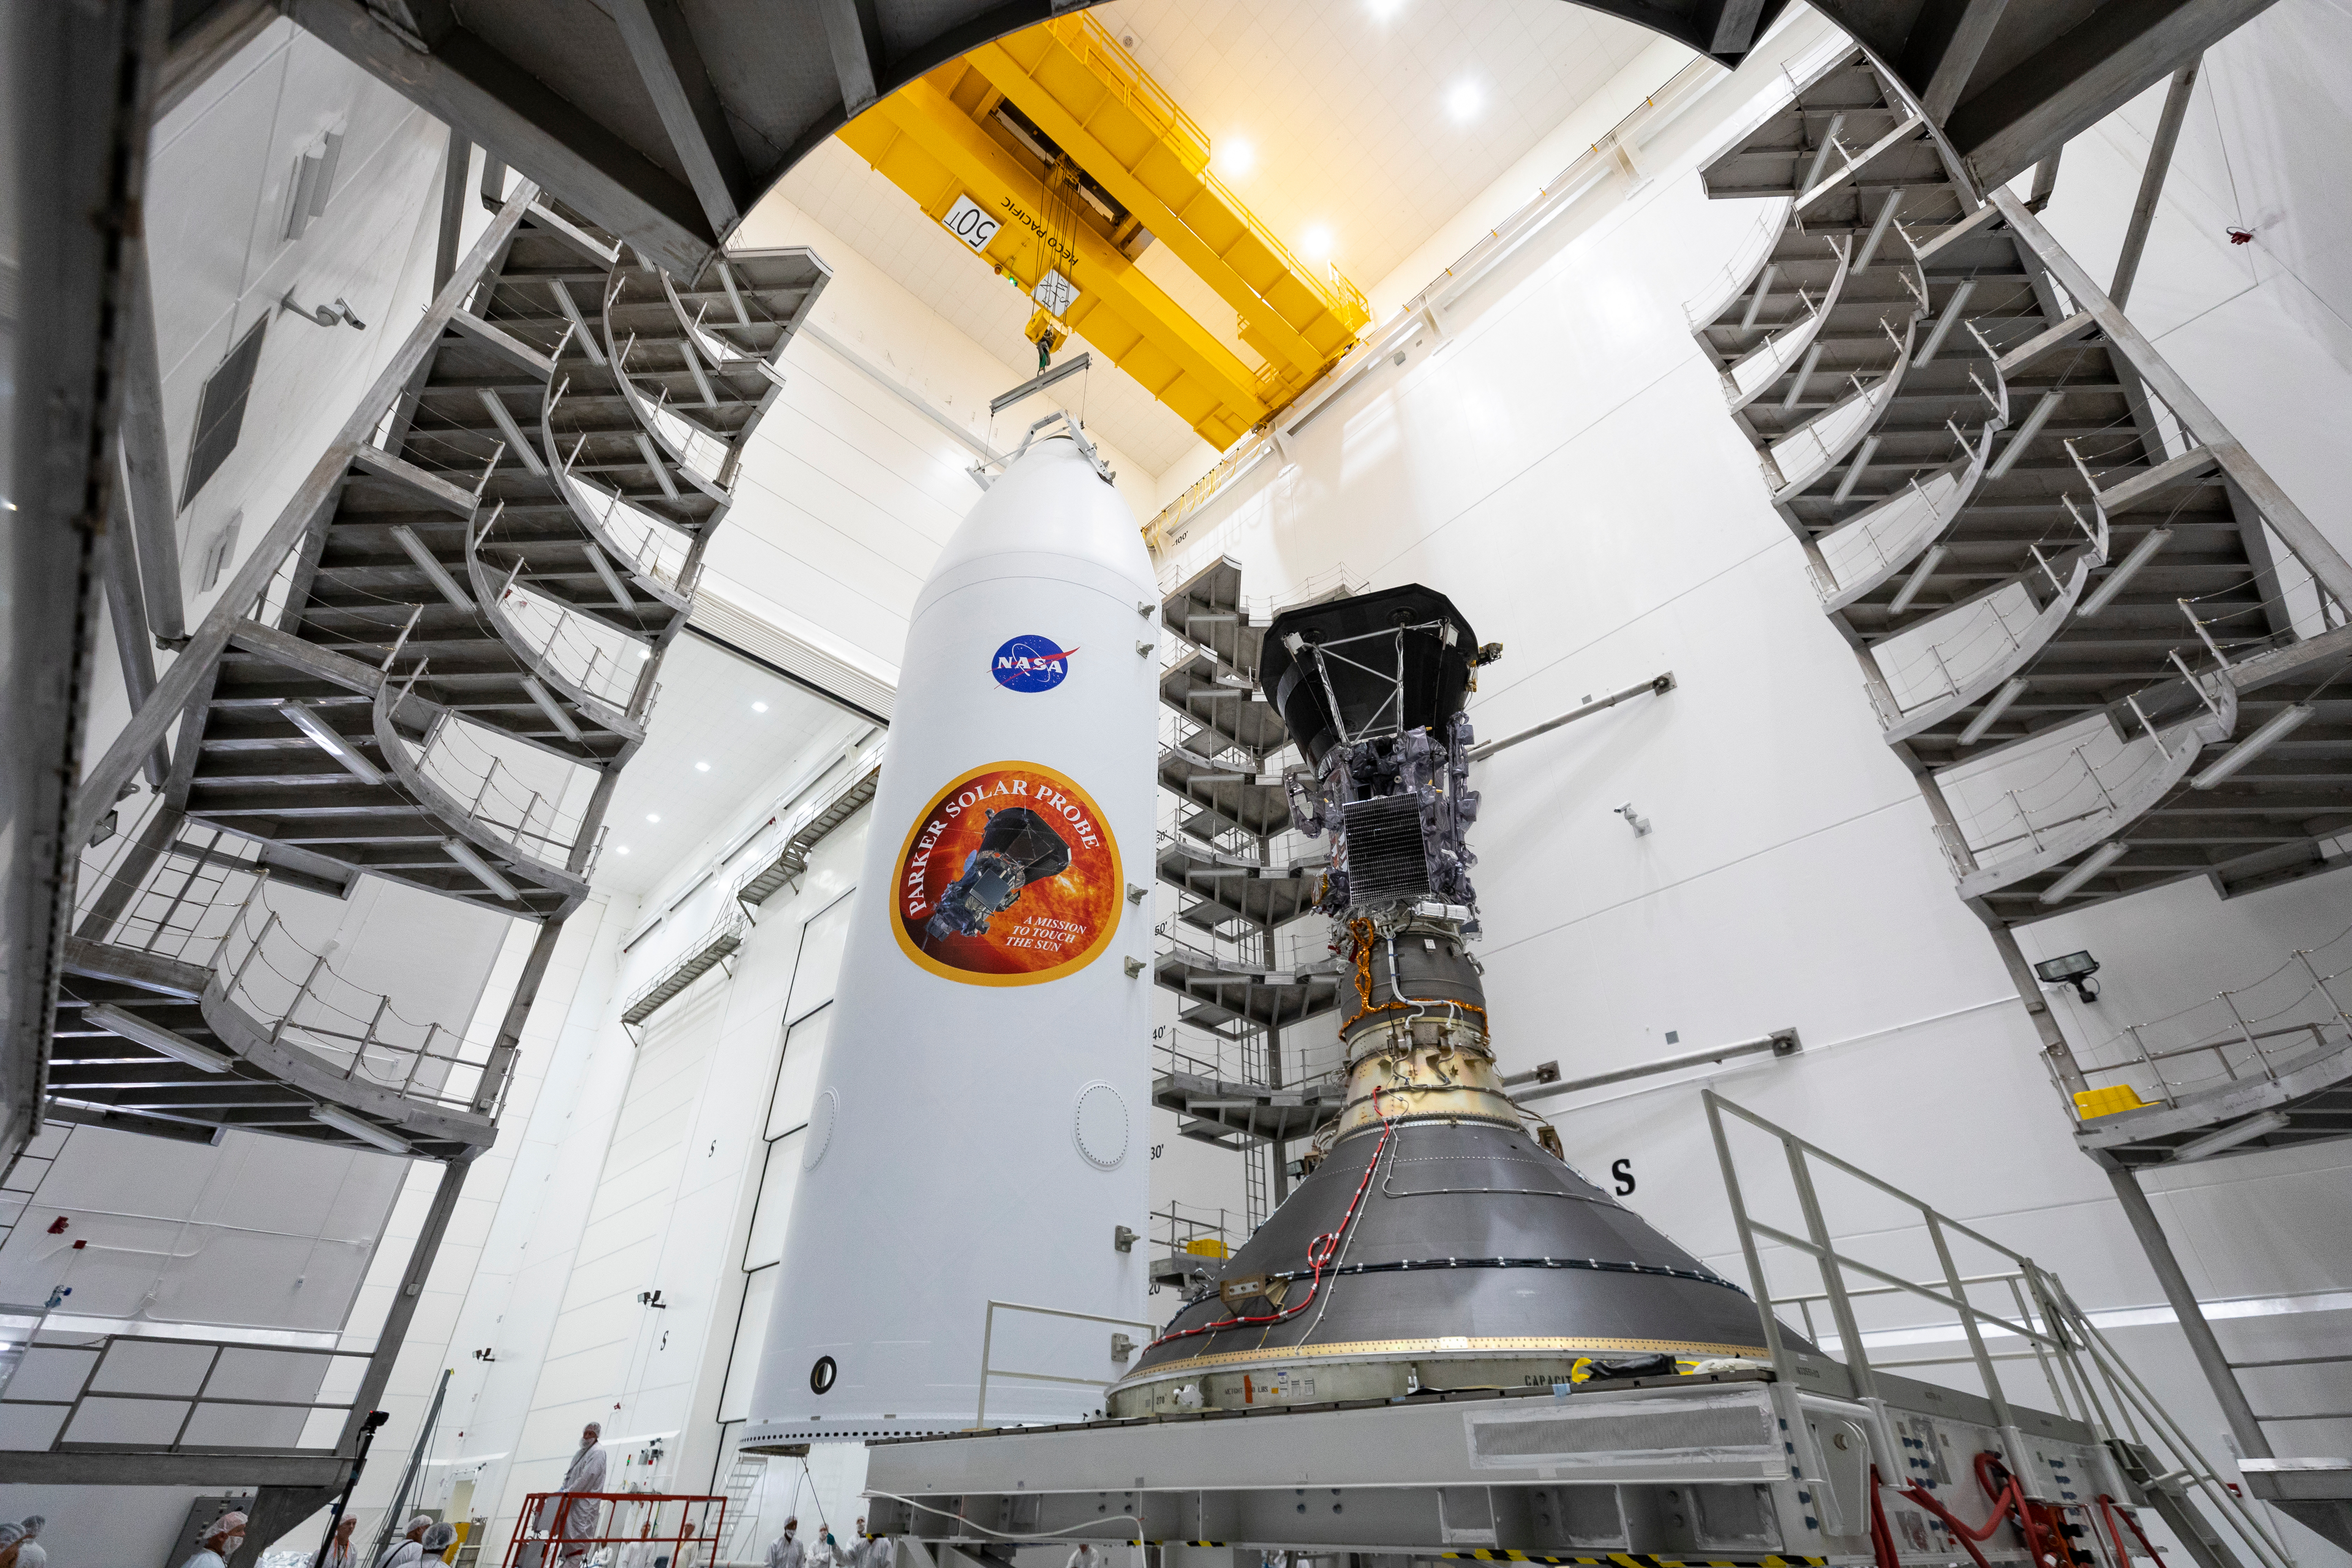 Parker Solar Probe, shown on July 16, 2018, is mounted atop its third stage rocket motor with one half of the 62.7-foot tall fairing that will encapsulate it. After encapsulation, the spacecraft will move from Astrotech Space Operations in Titusville, Florida to Space Launch Complex 37 on Cape Canaveral Air Force Station, where it will be integrated onto its launch vehicle, a United Launch Alliance Delta IV Heavy. 